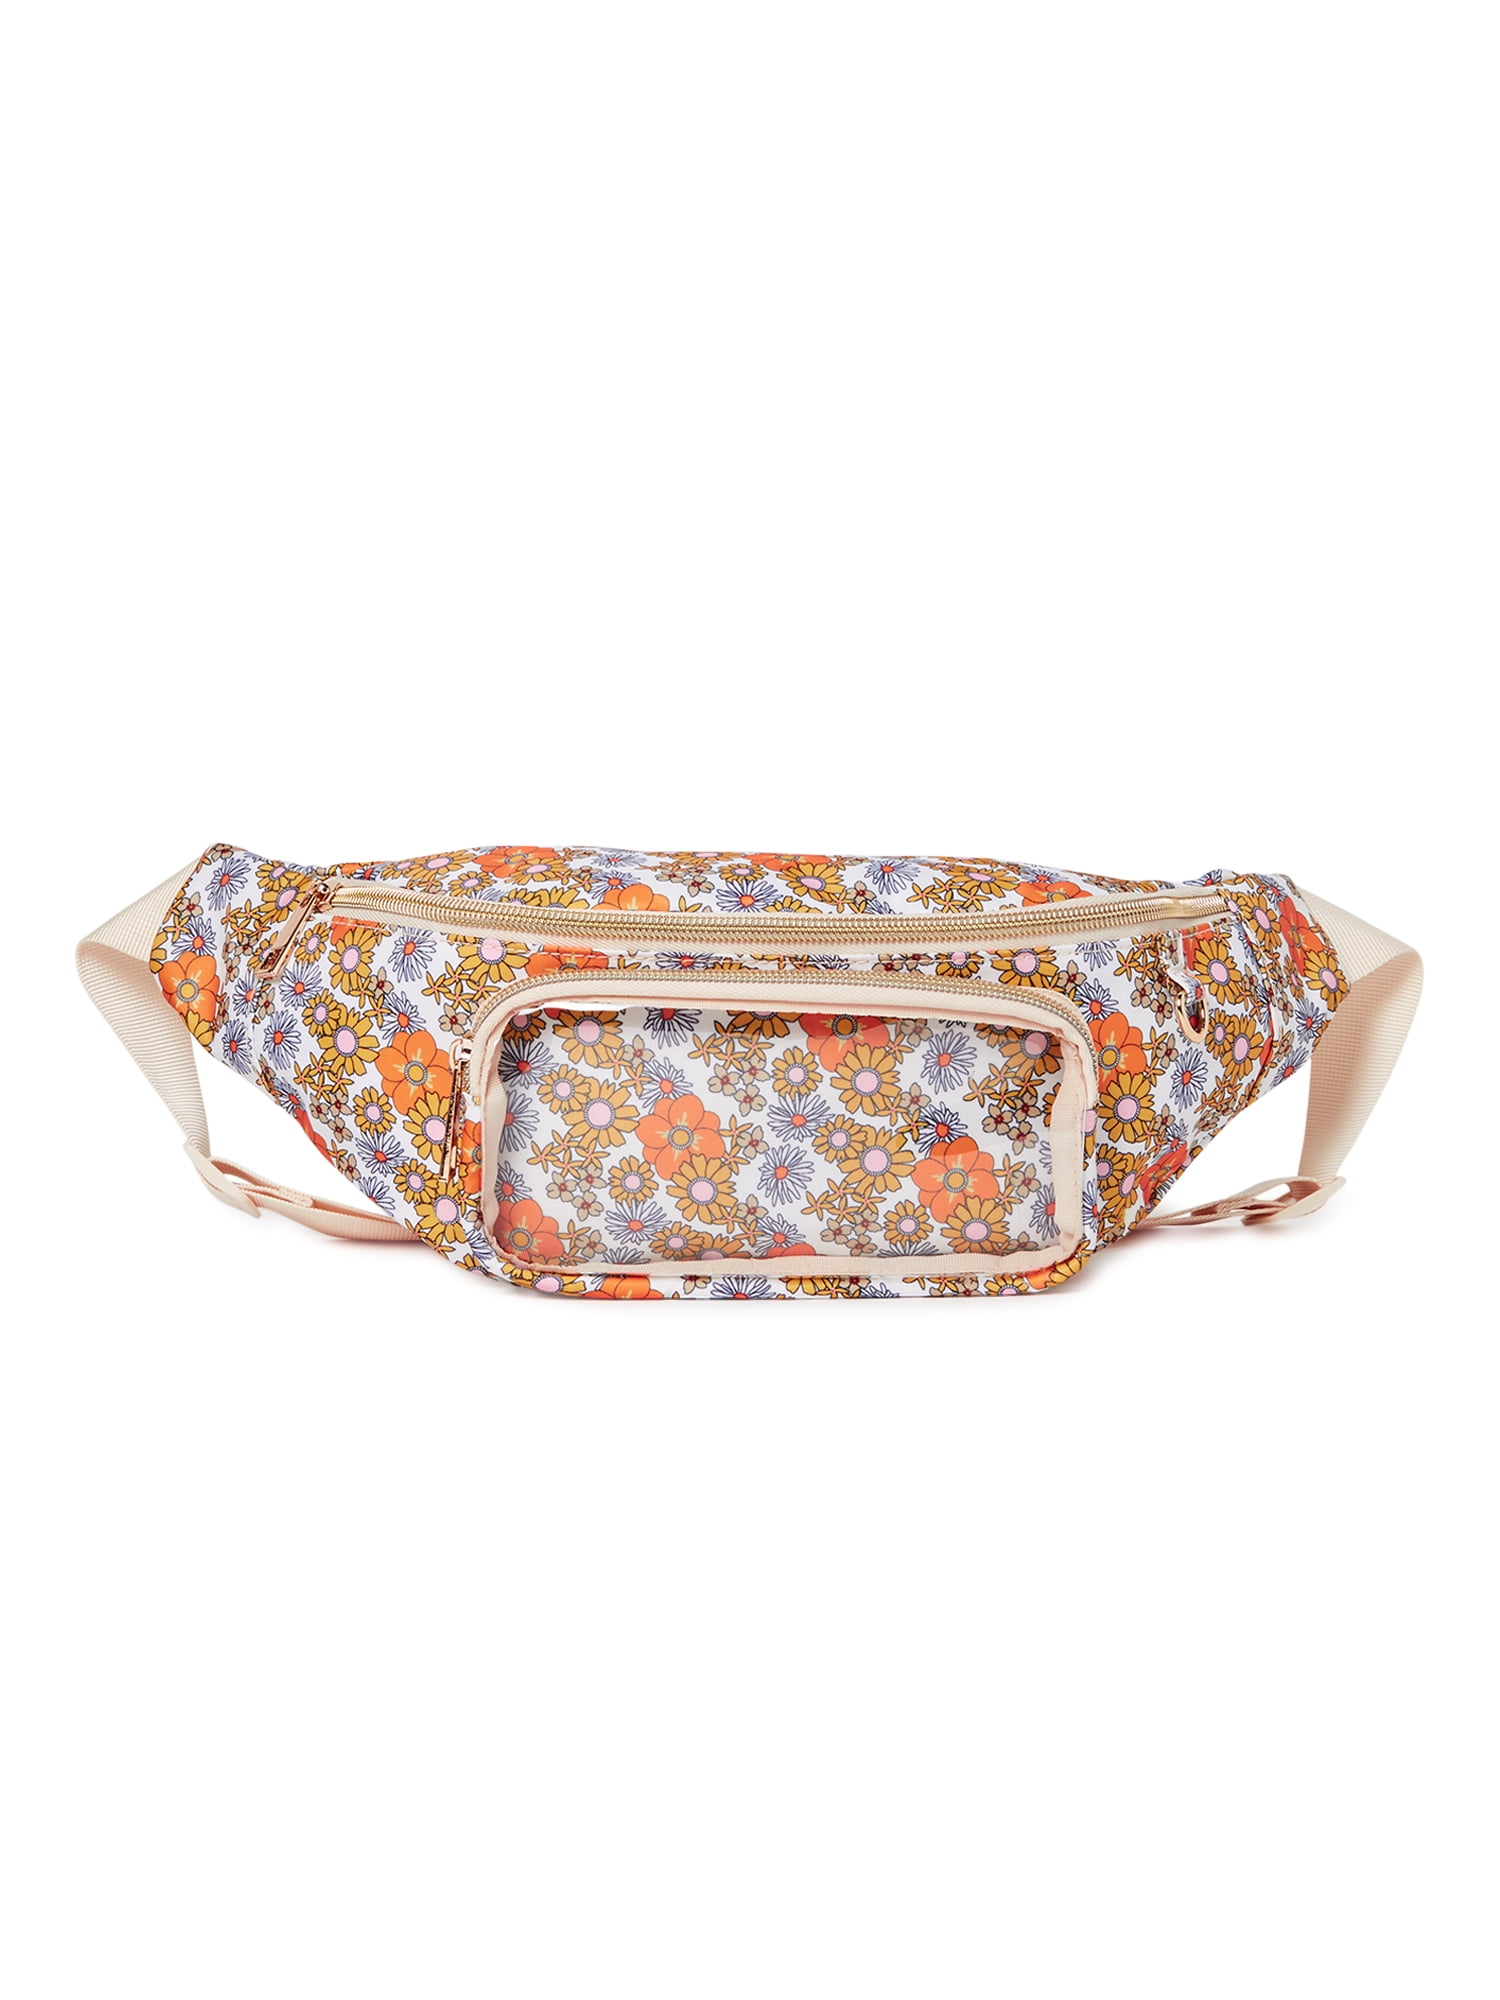 Chewy Vuitton Flower Fanny Pack